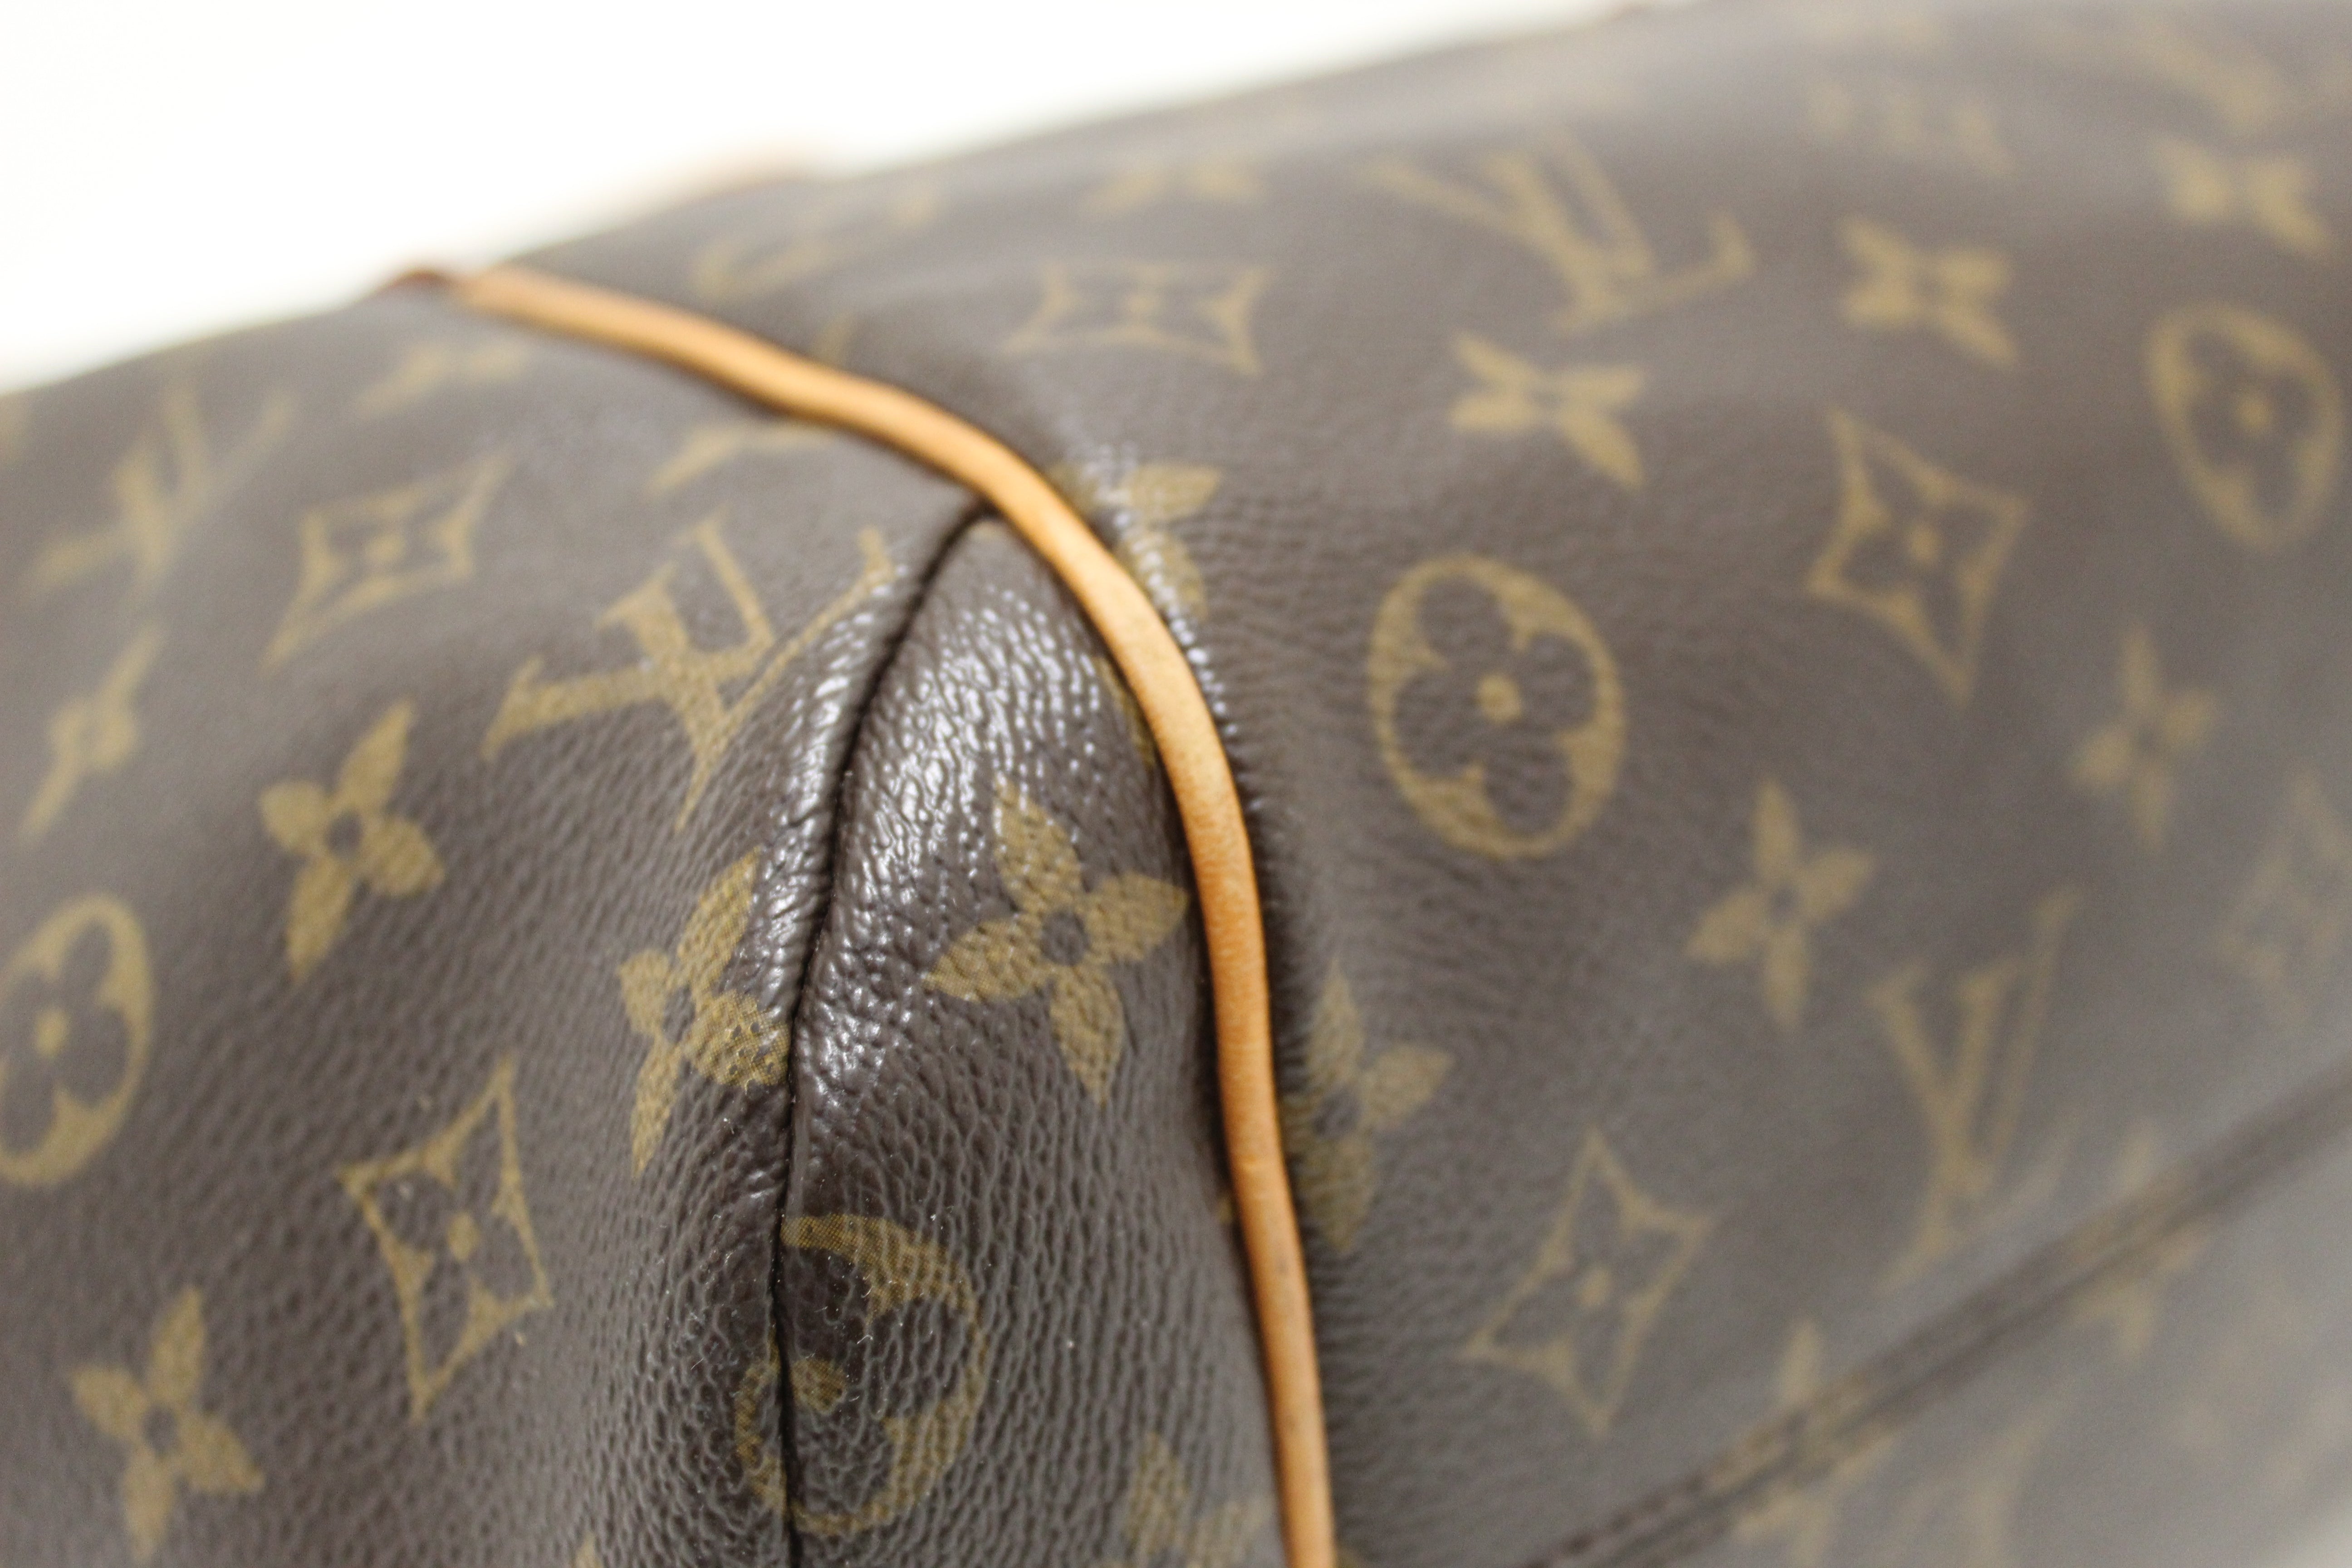 Louis Vuitton Totally GM Monogram - Very good condition - clothing